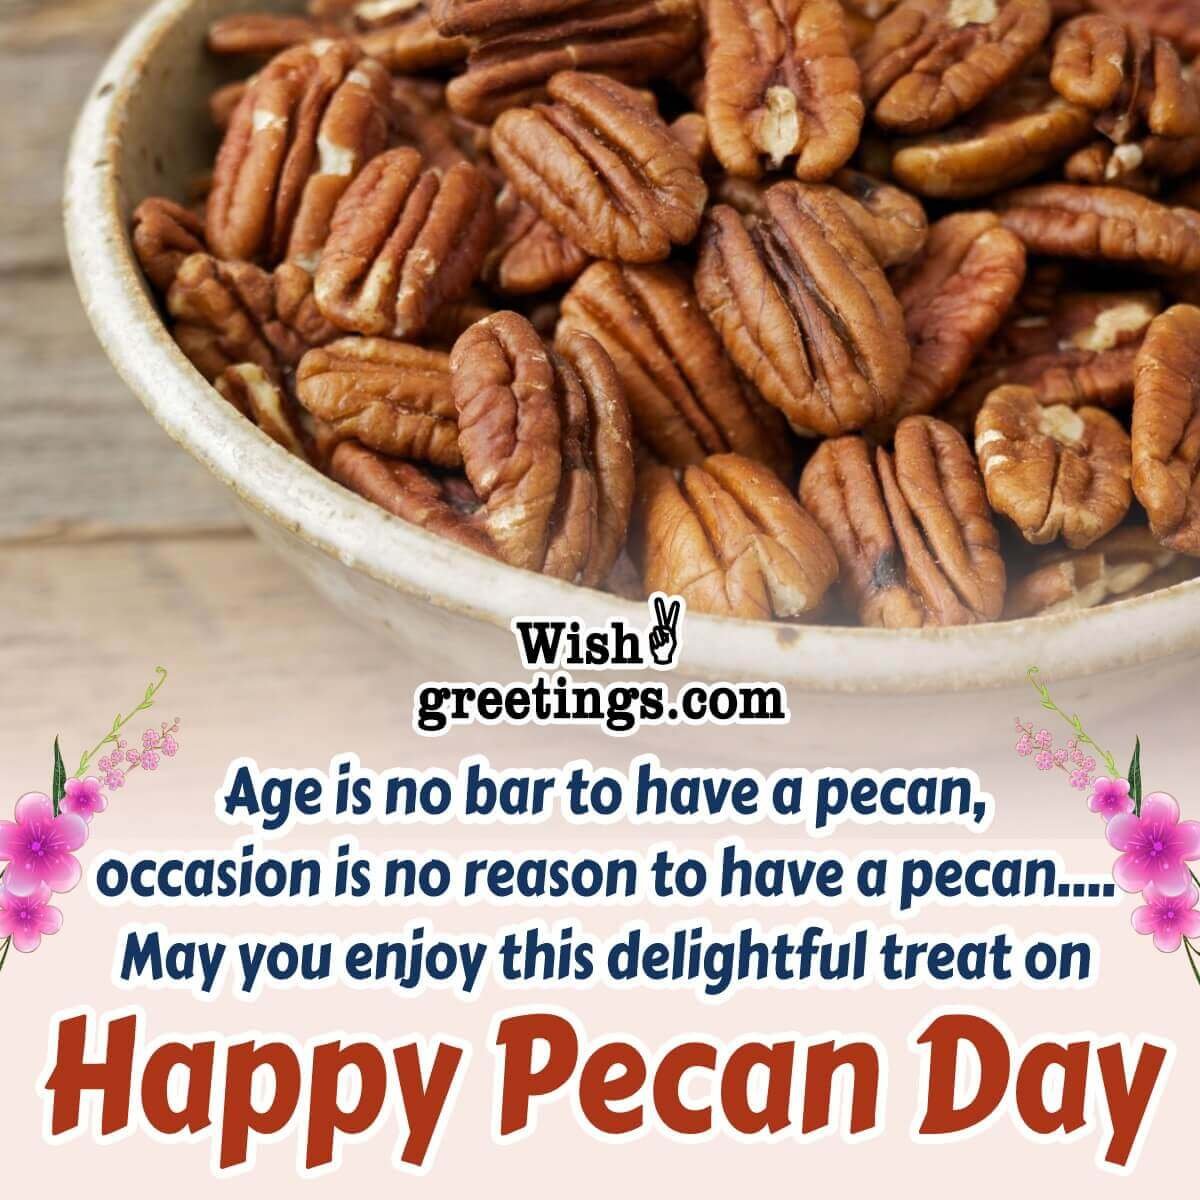 Happy National Pecan Day Wishes, Messages